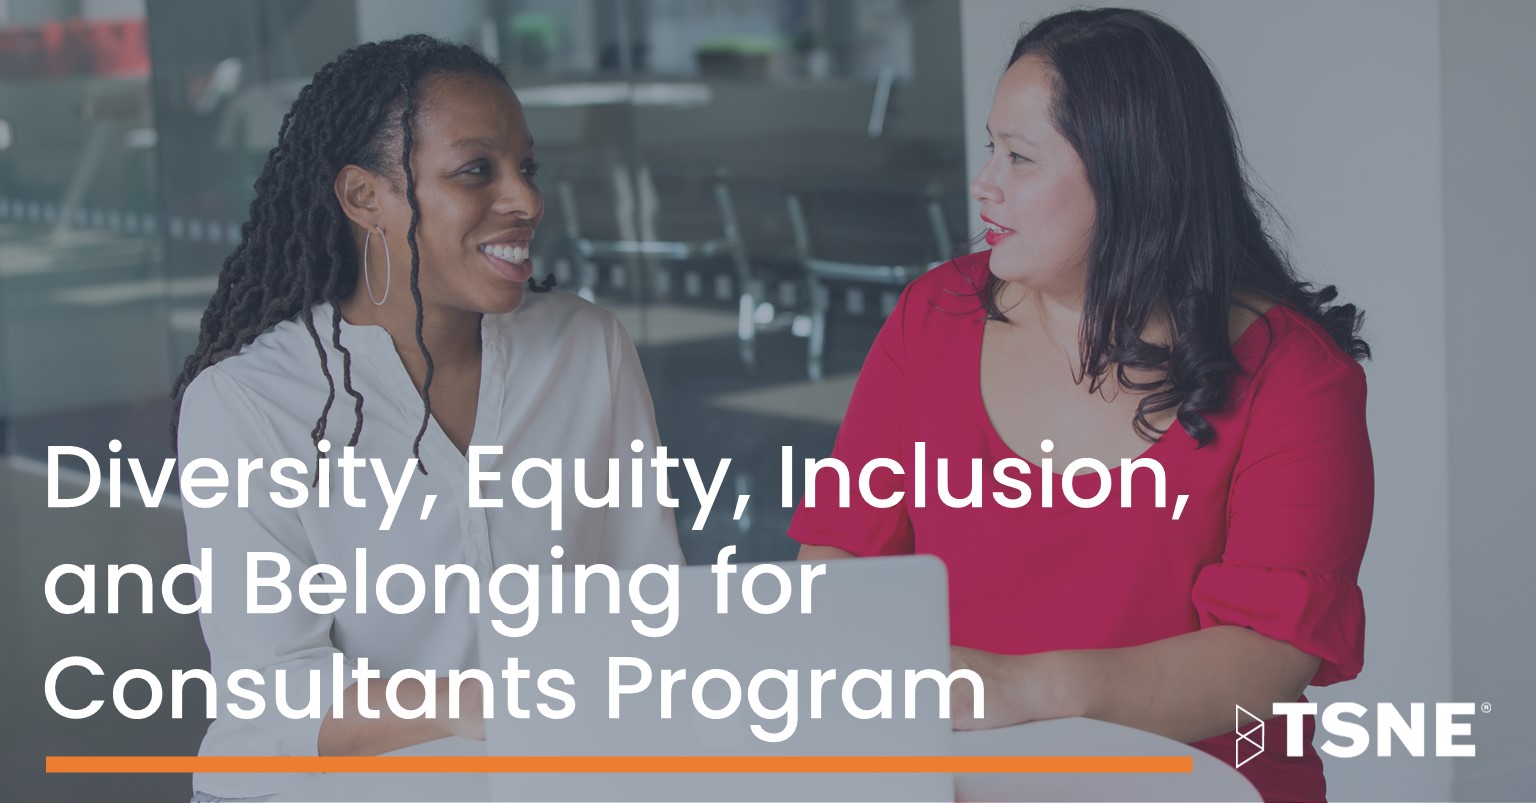 Diversity, Equity, Inclusion and Belonging for Consultants Program Application Form